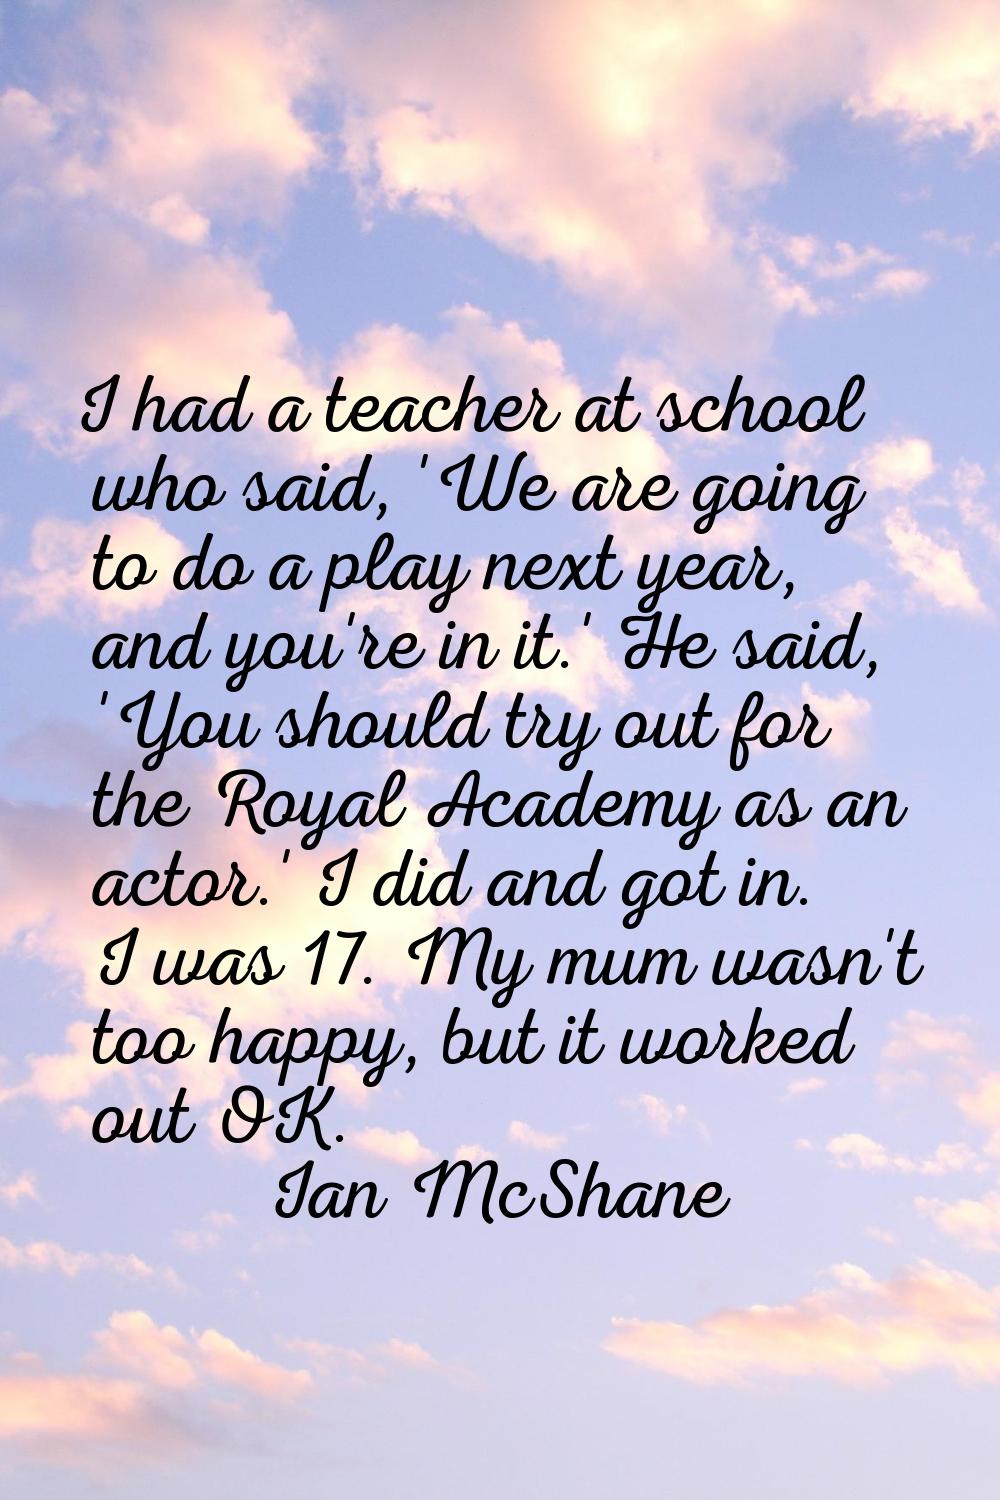 I had a teacher at school who said, 'We are going to do a play next year, and you're in it.' He sai